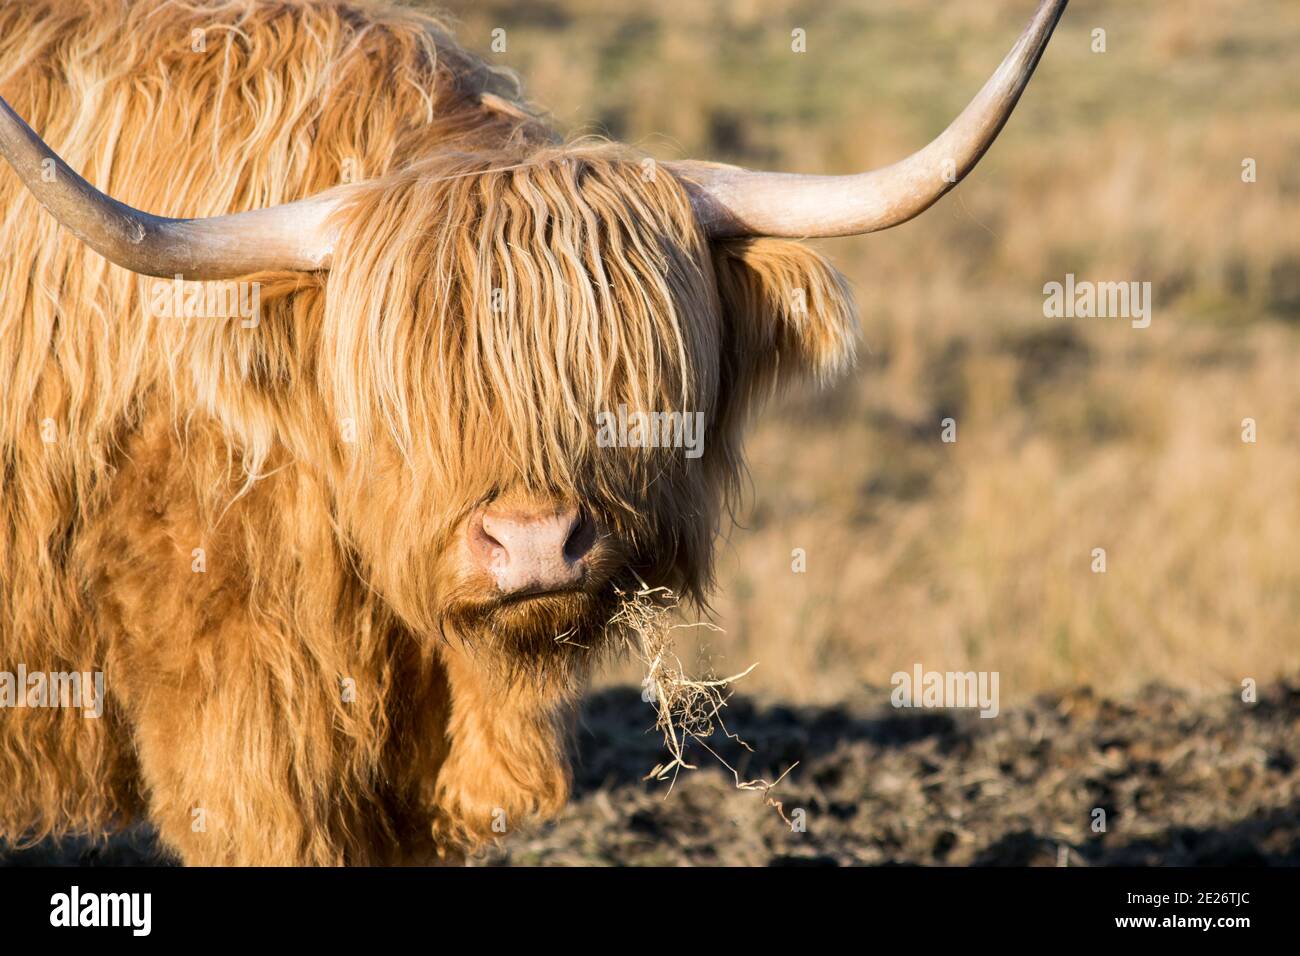 Highland cow eating hay Stock Photo